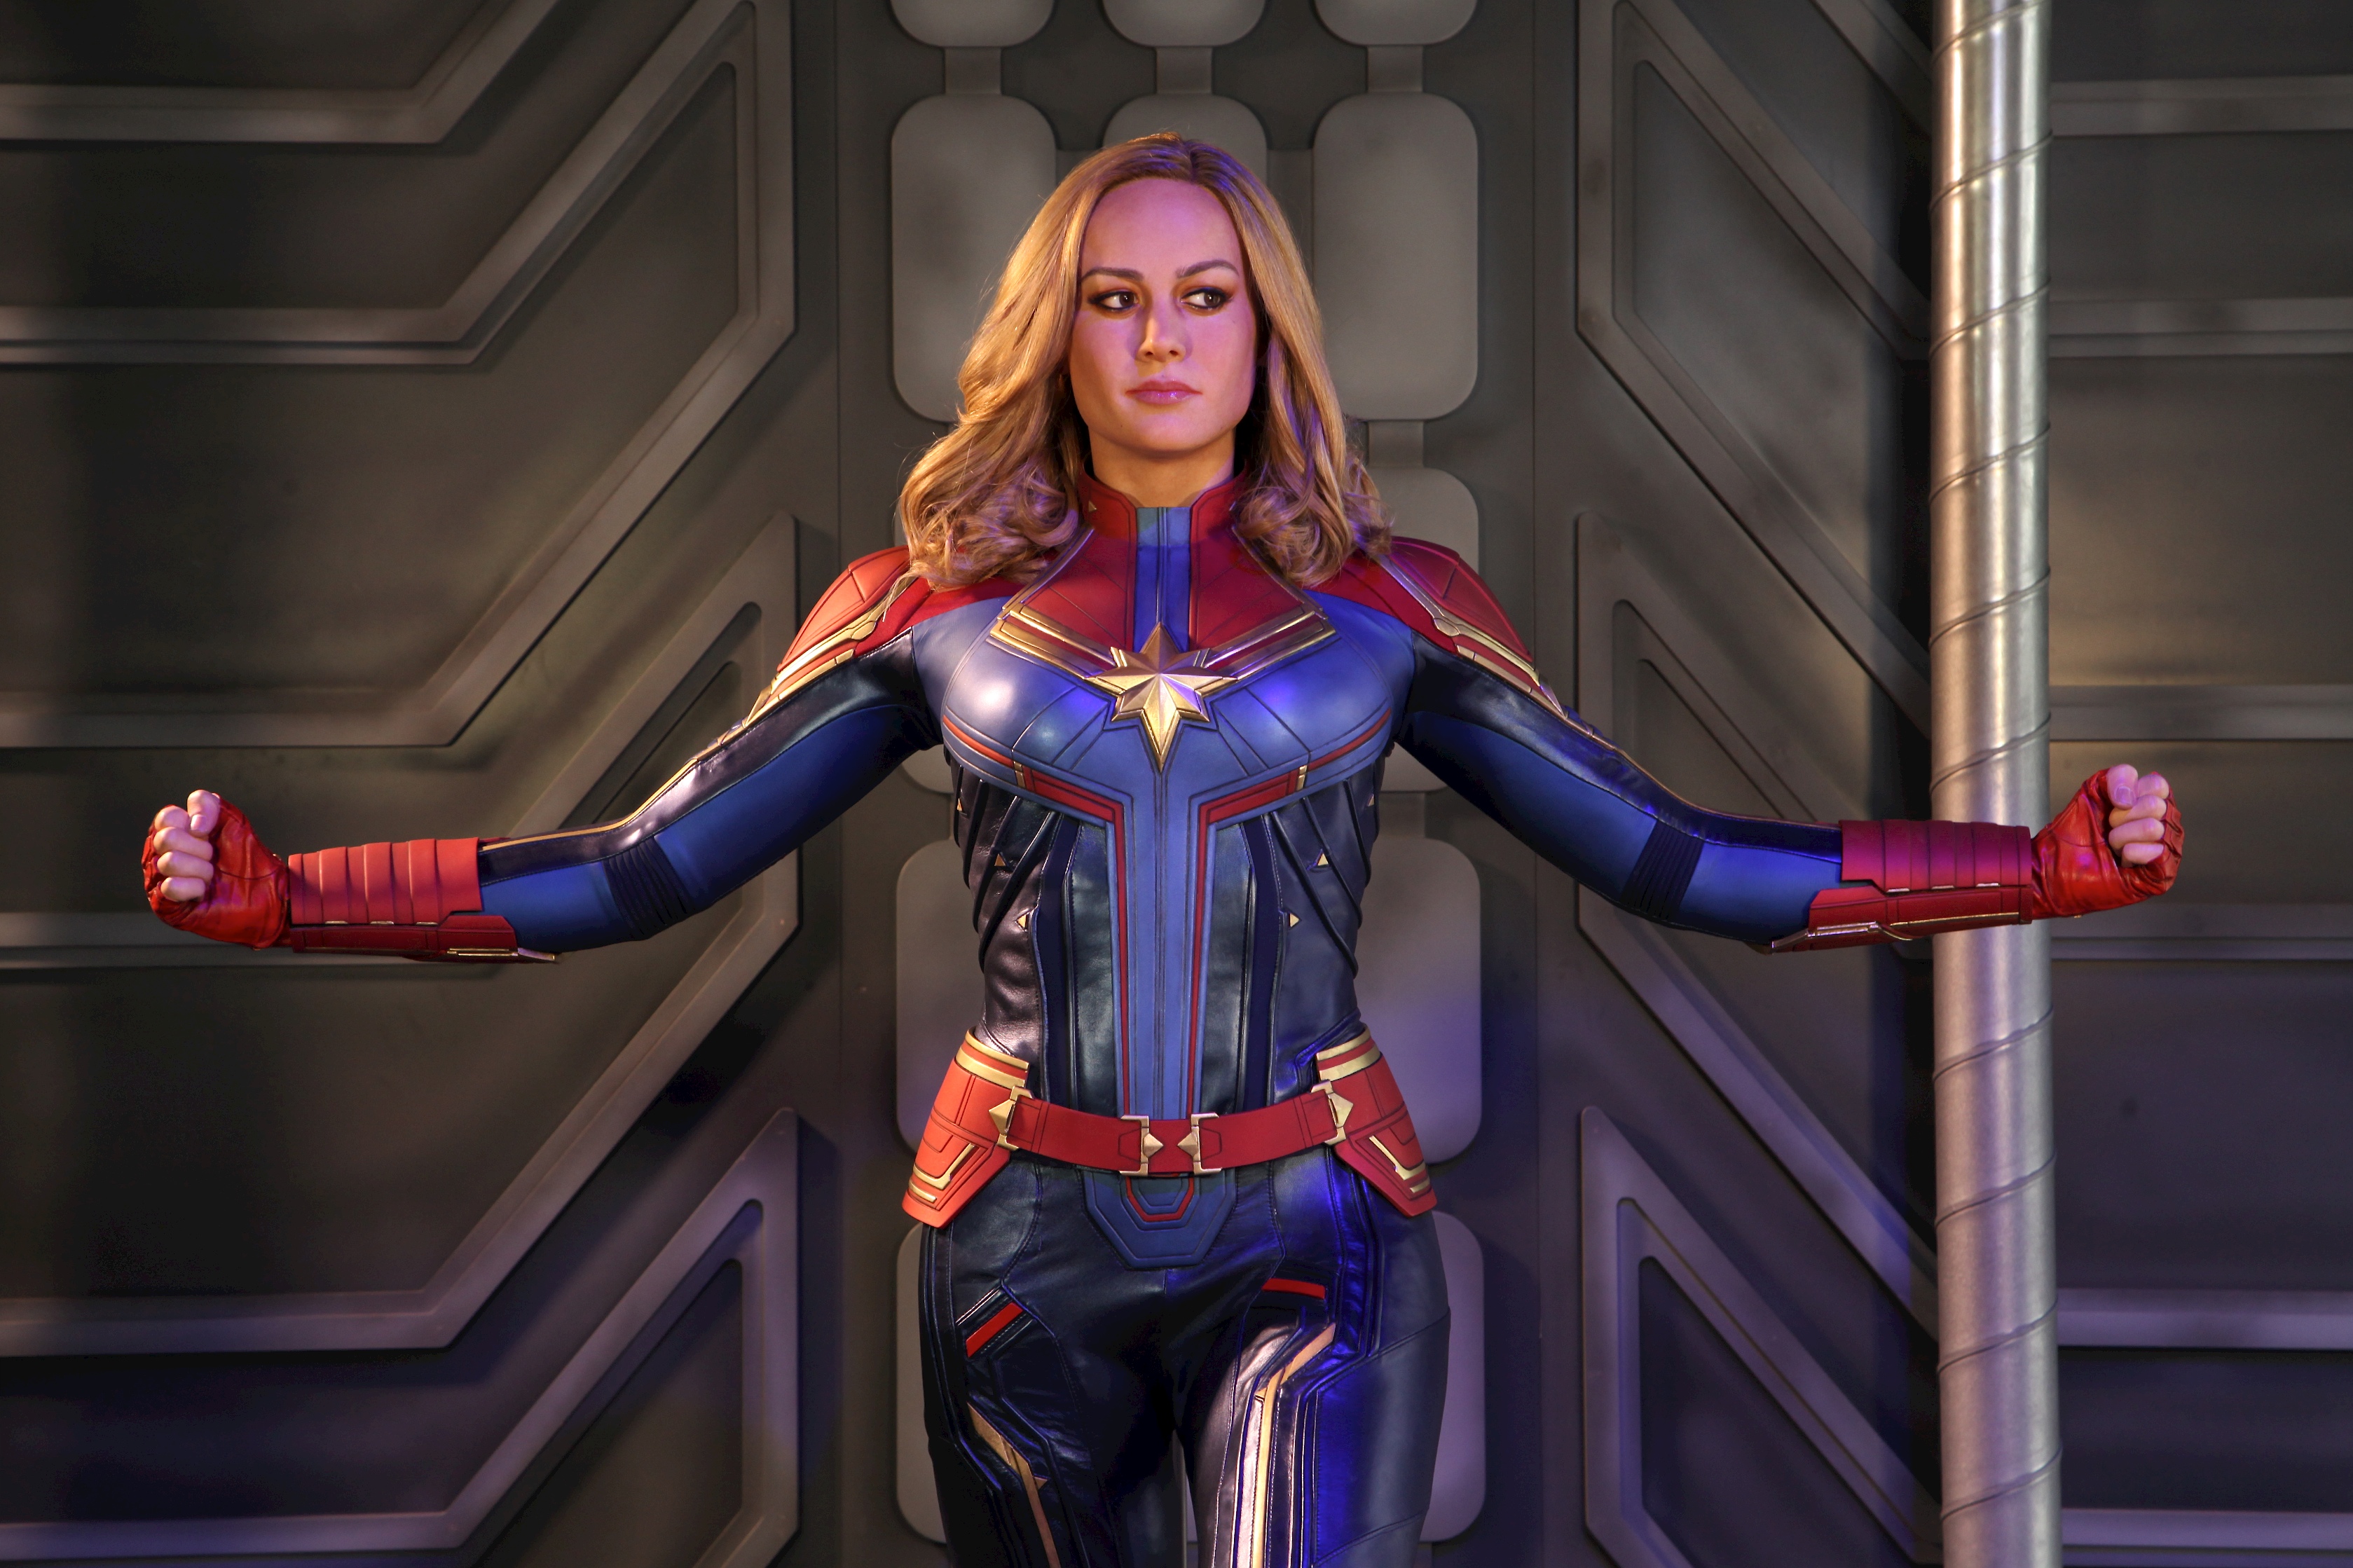 Captain Marvel with her arms out wax figure at Madame Tussauds Blackpool